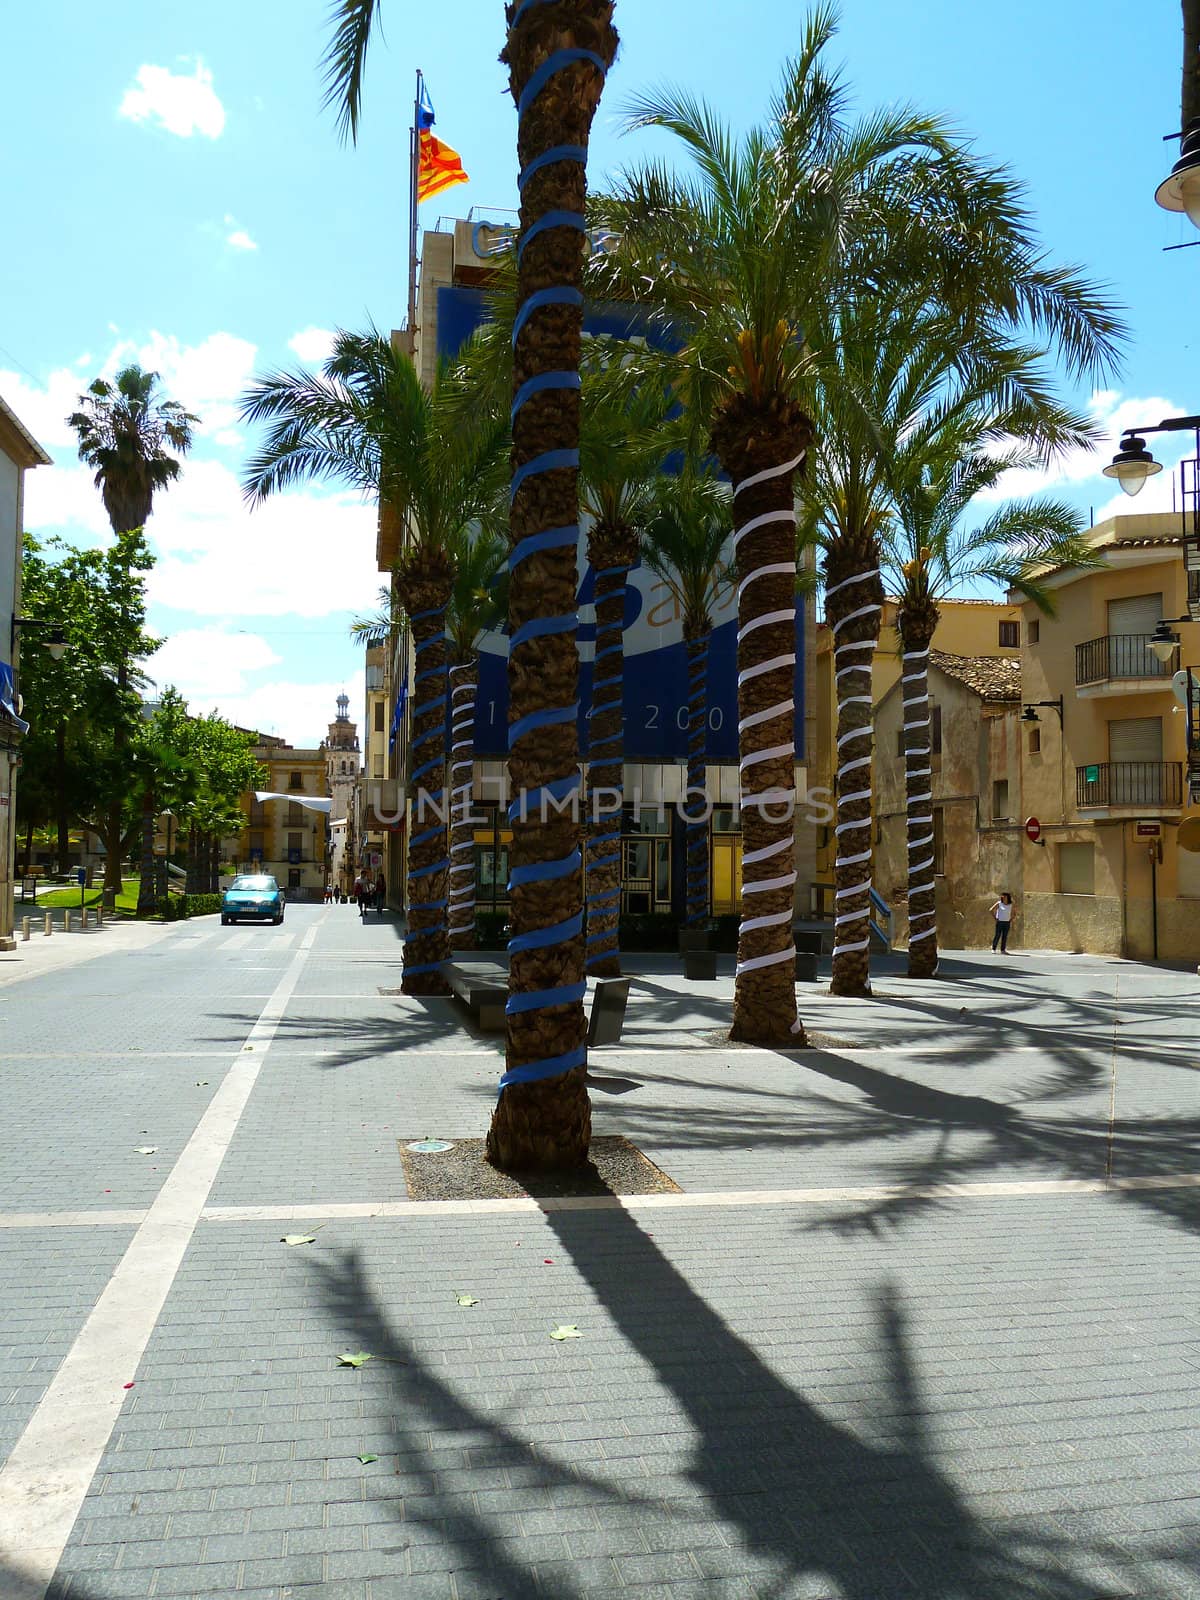 decorated palm trees and street in a spanish town